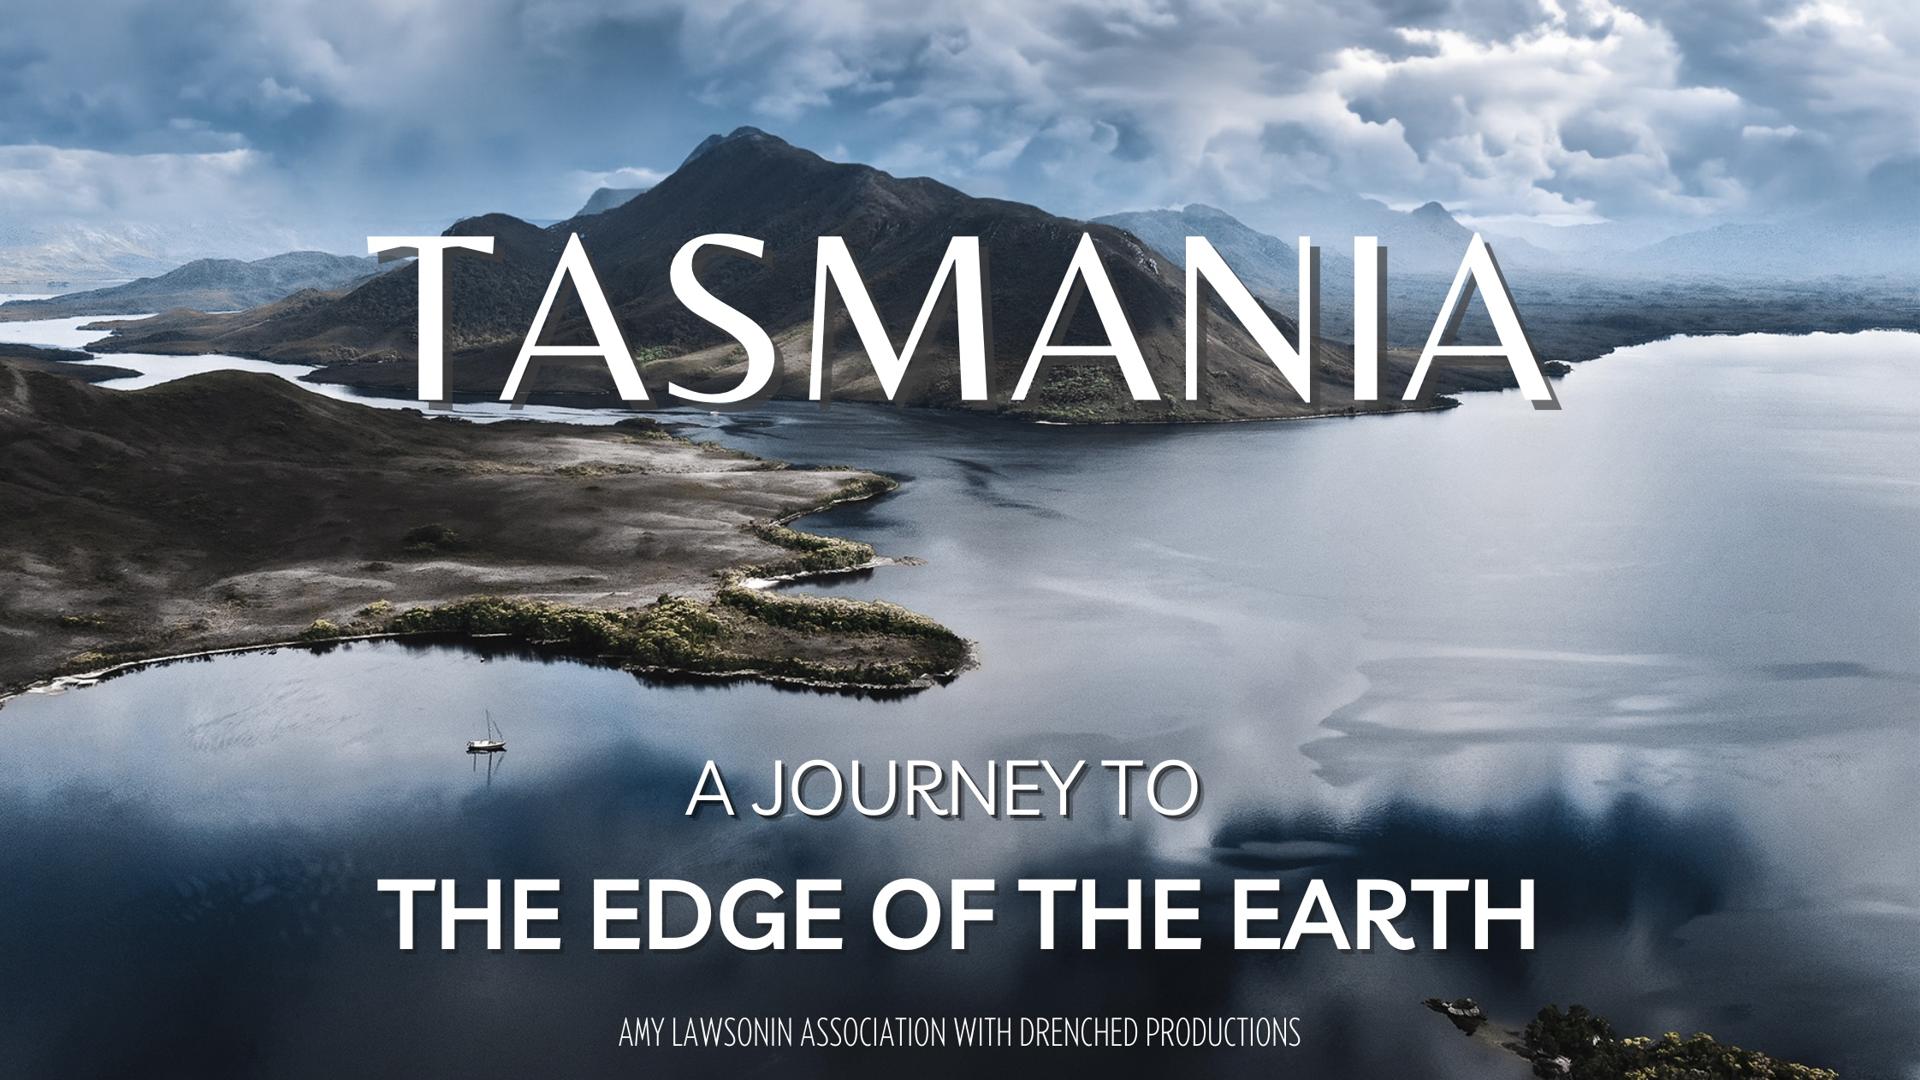 Tasmania: A Journey to the Edge of the Earth